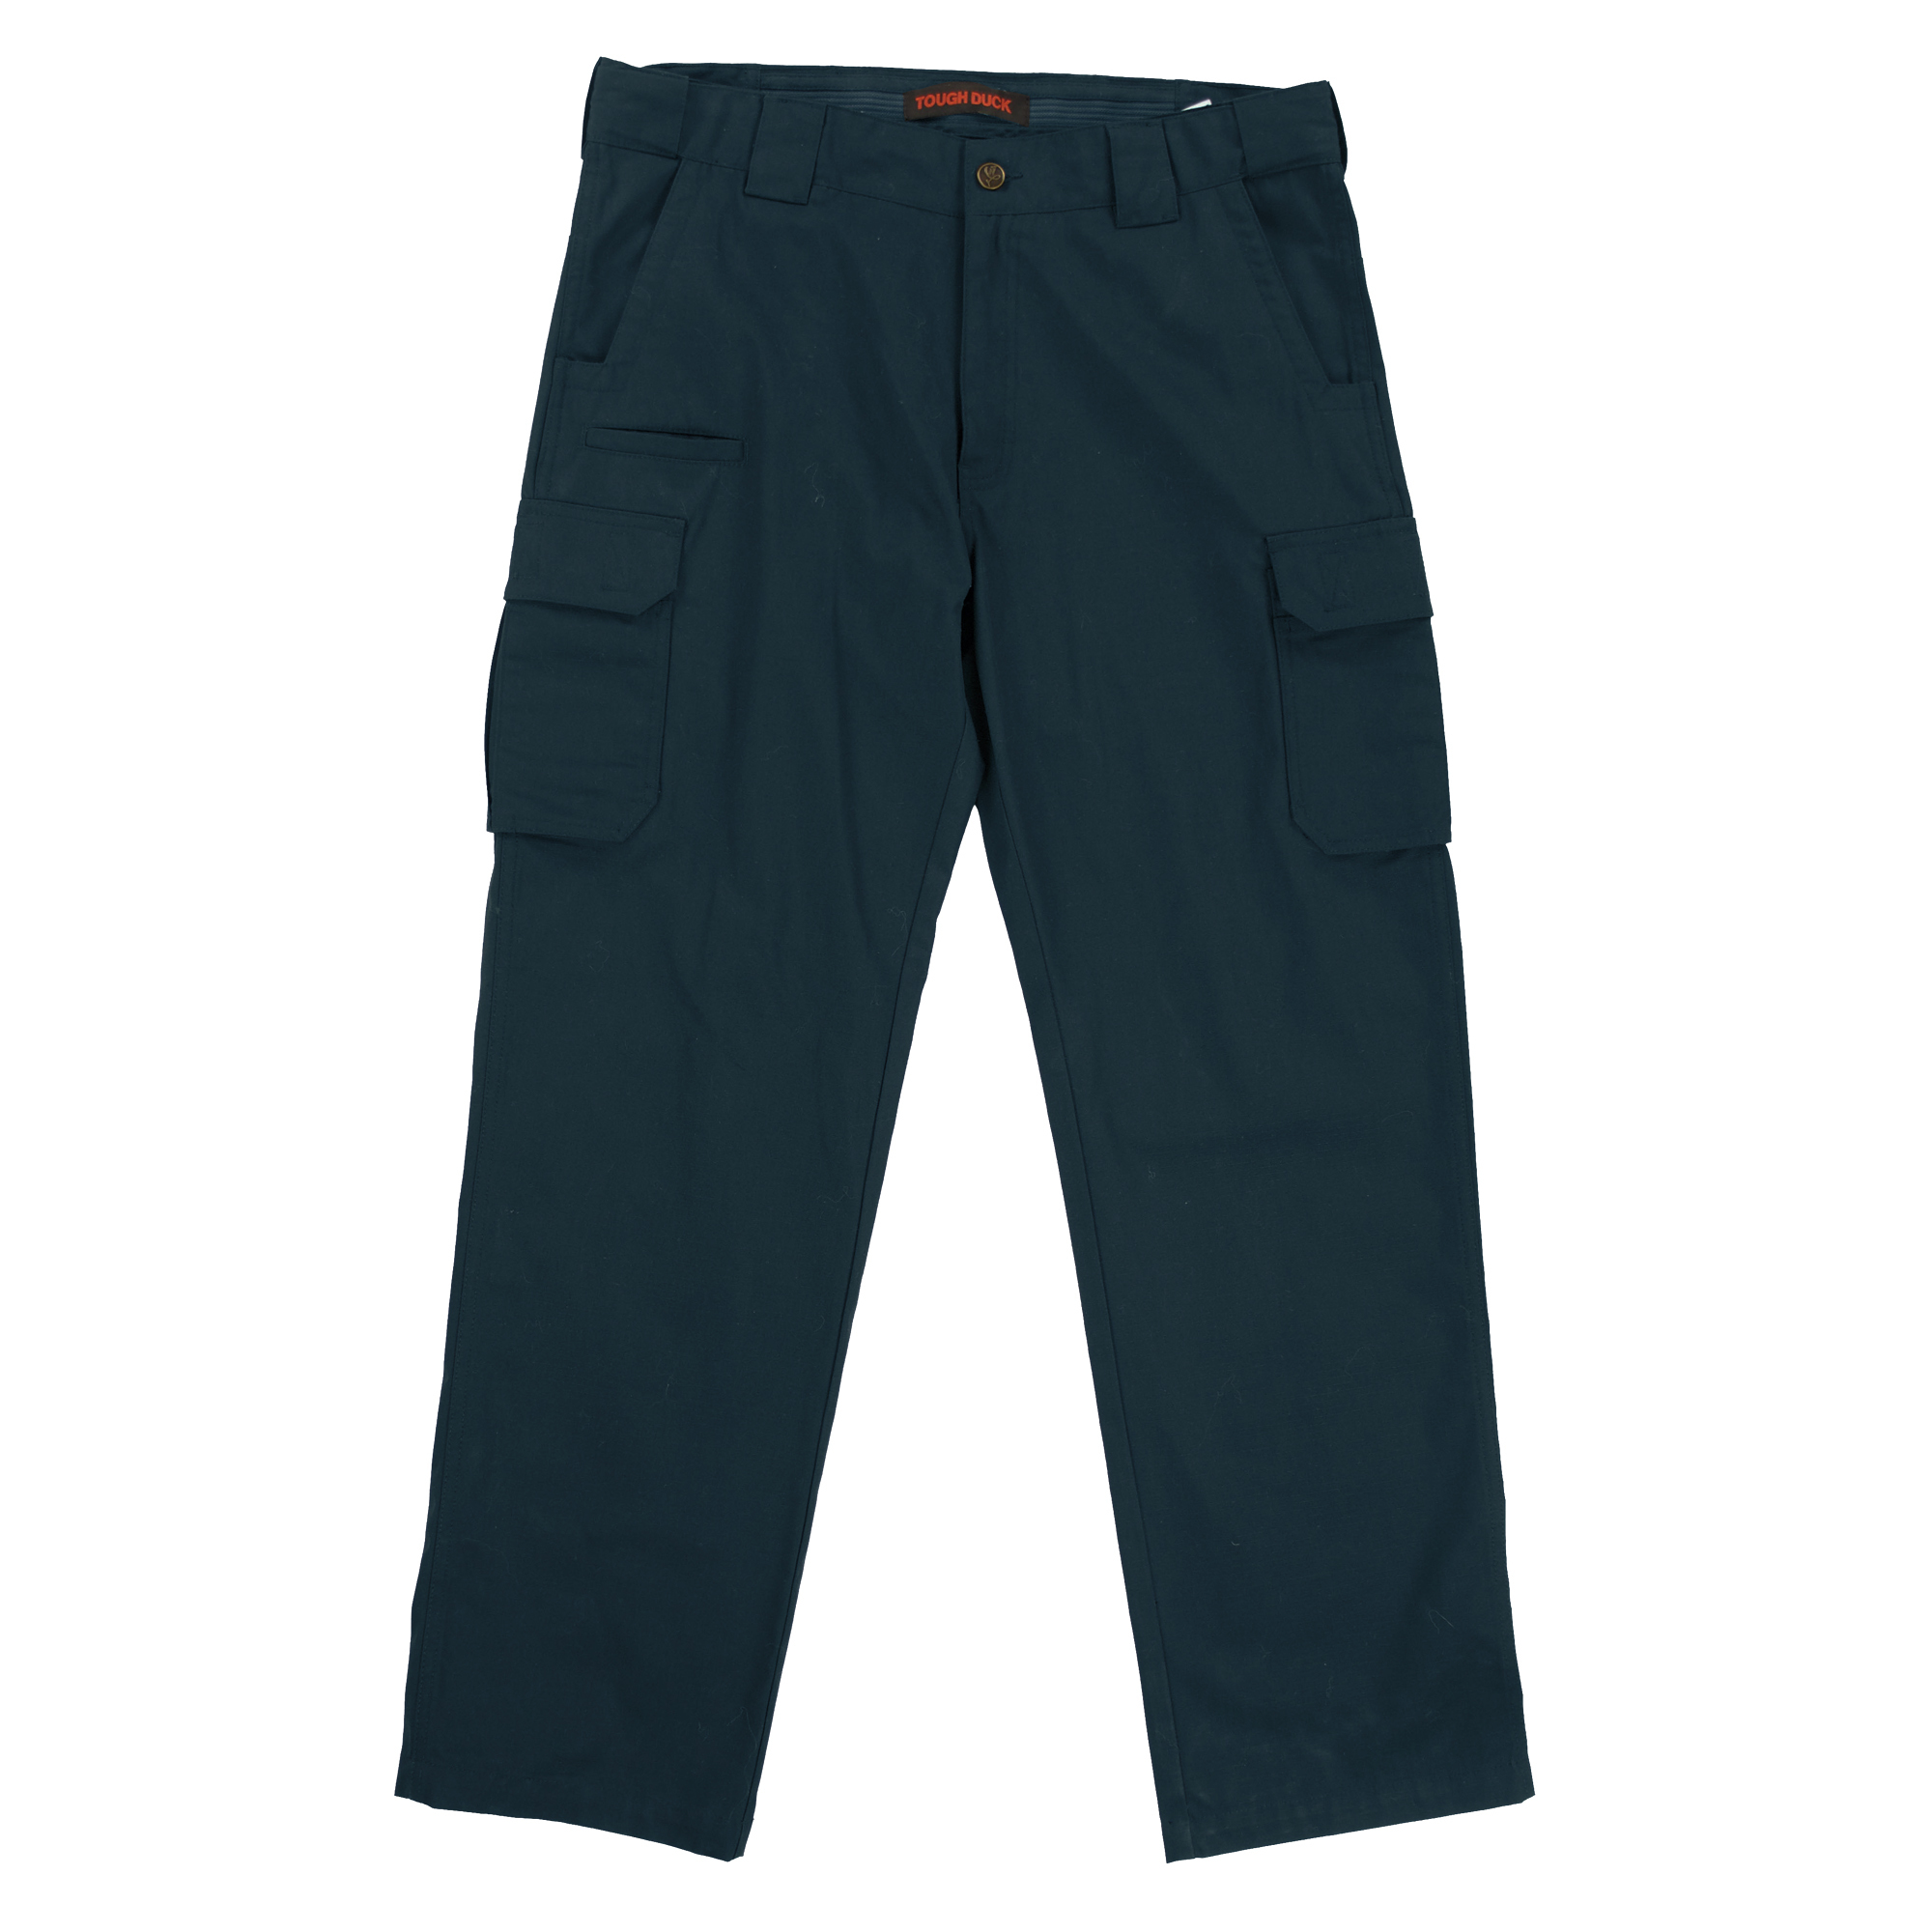 Tough Duck, Ripstop Cargo Pant, Waist 52 in, Inseam 32 in, Color Navy, Model WP111